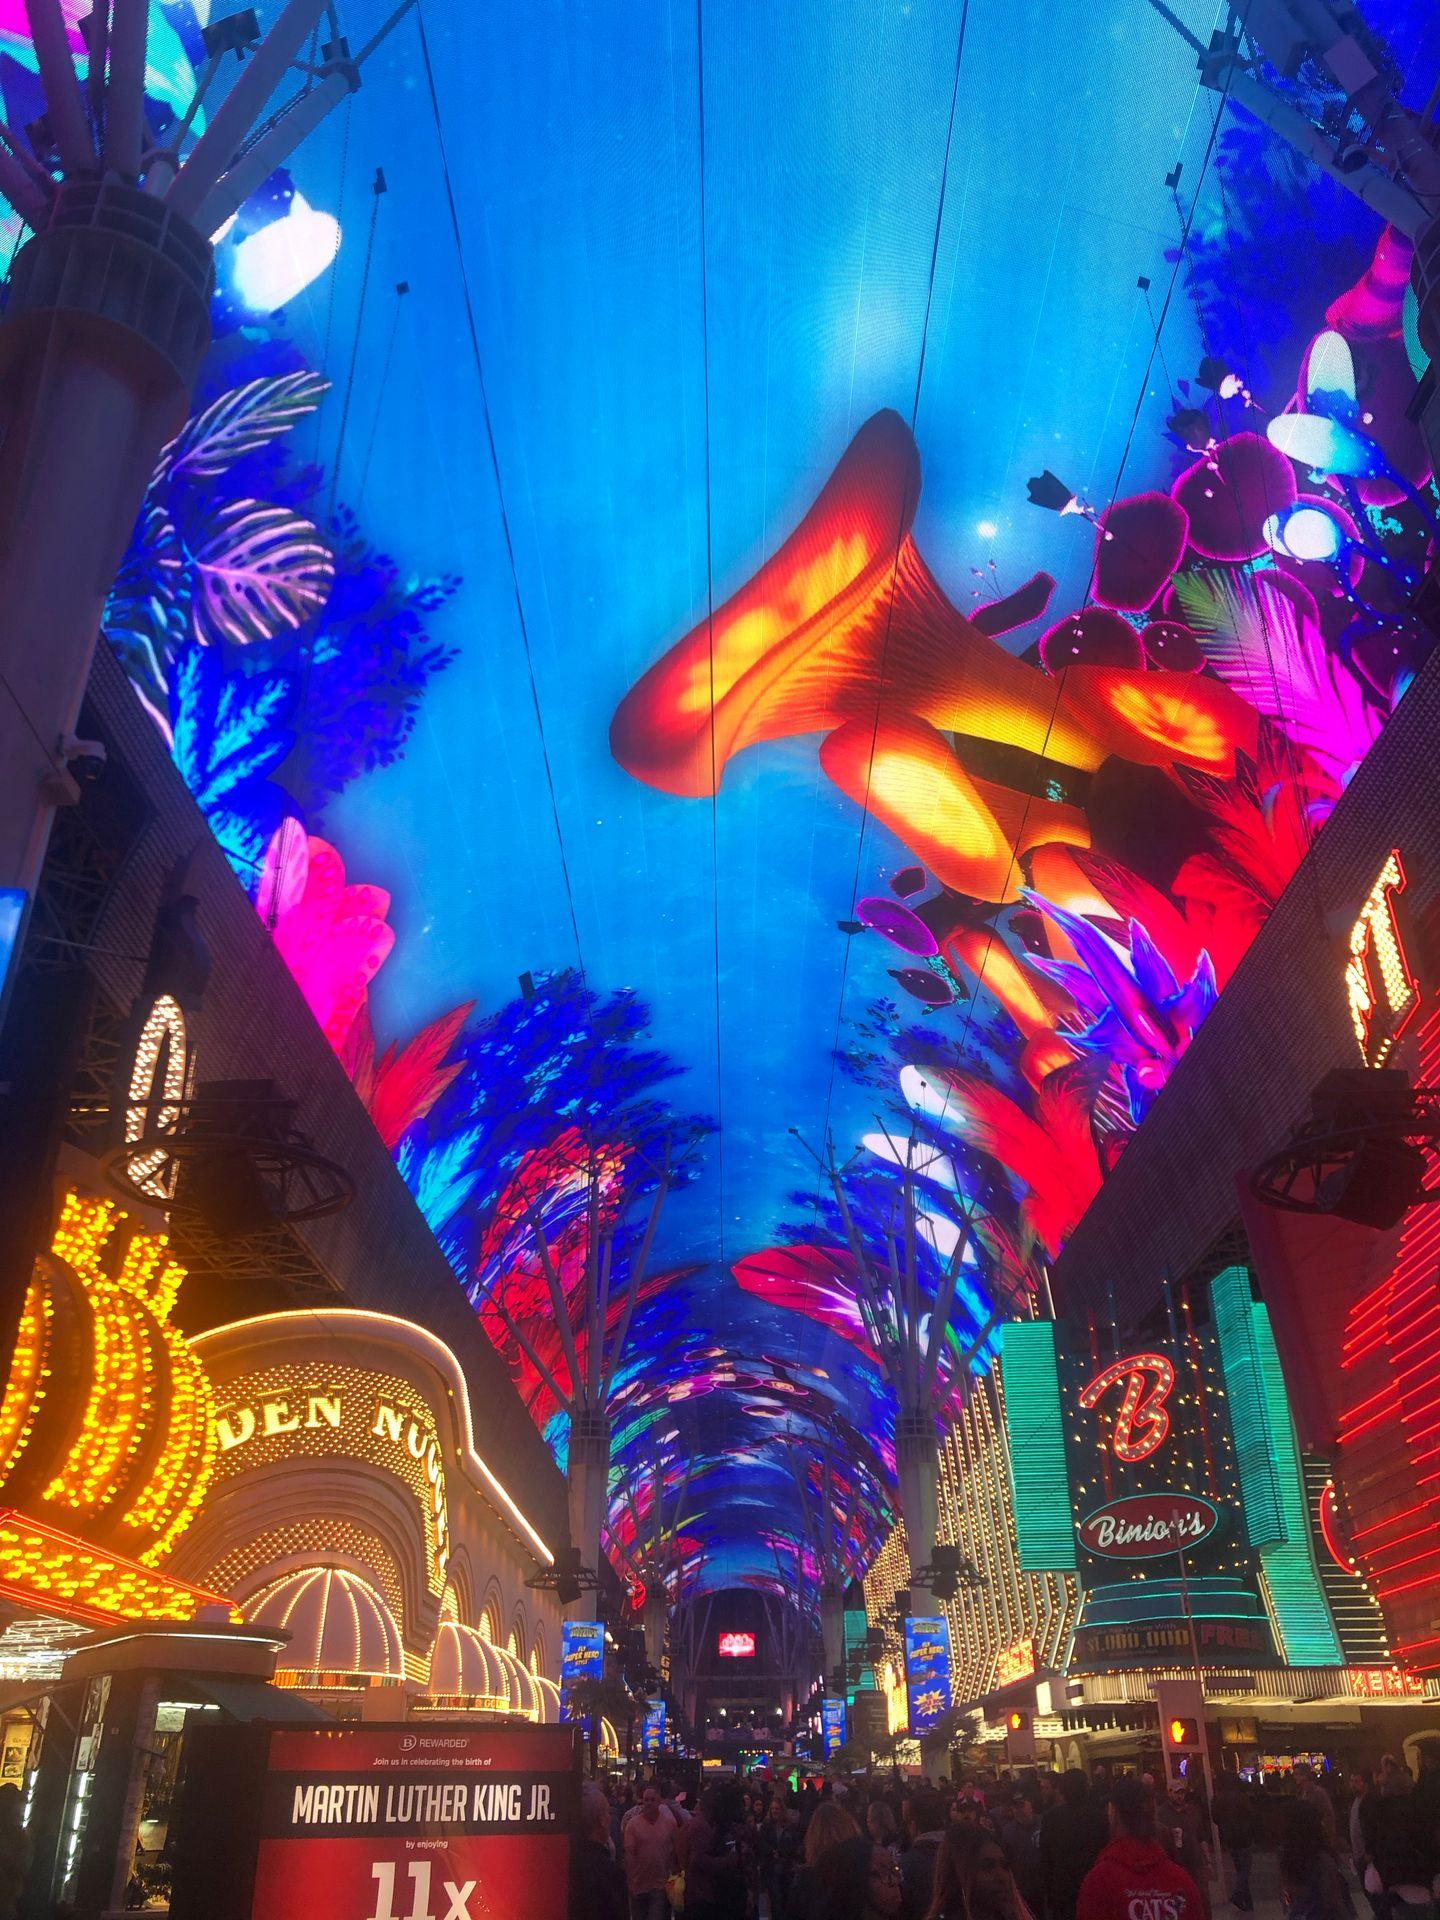 The digital roof creating a colorful scene with florals on Fremont Street.